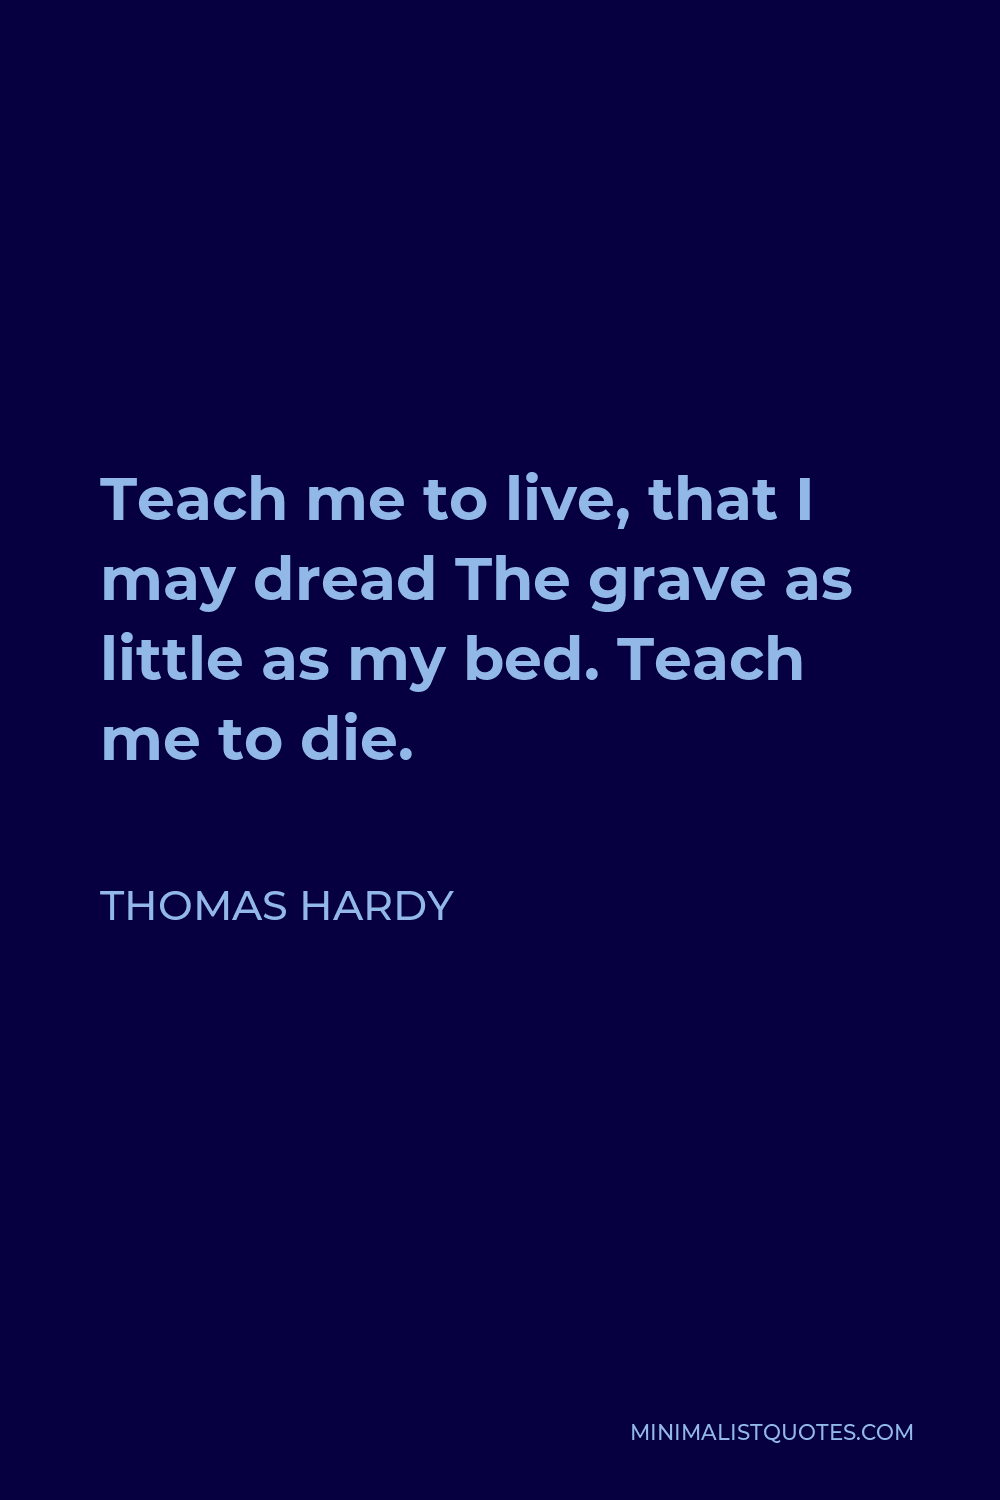 Thomas Hardy Quote - Teach me to live, that I may dread The grave as little as my bed. Teach me to die.